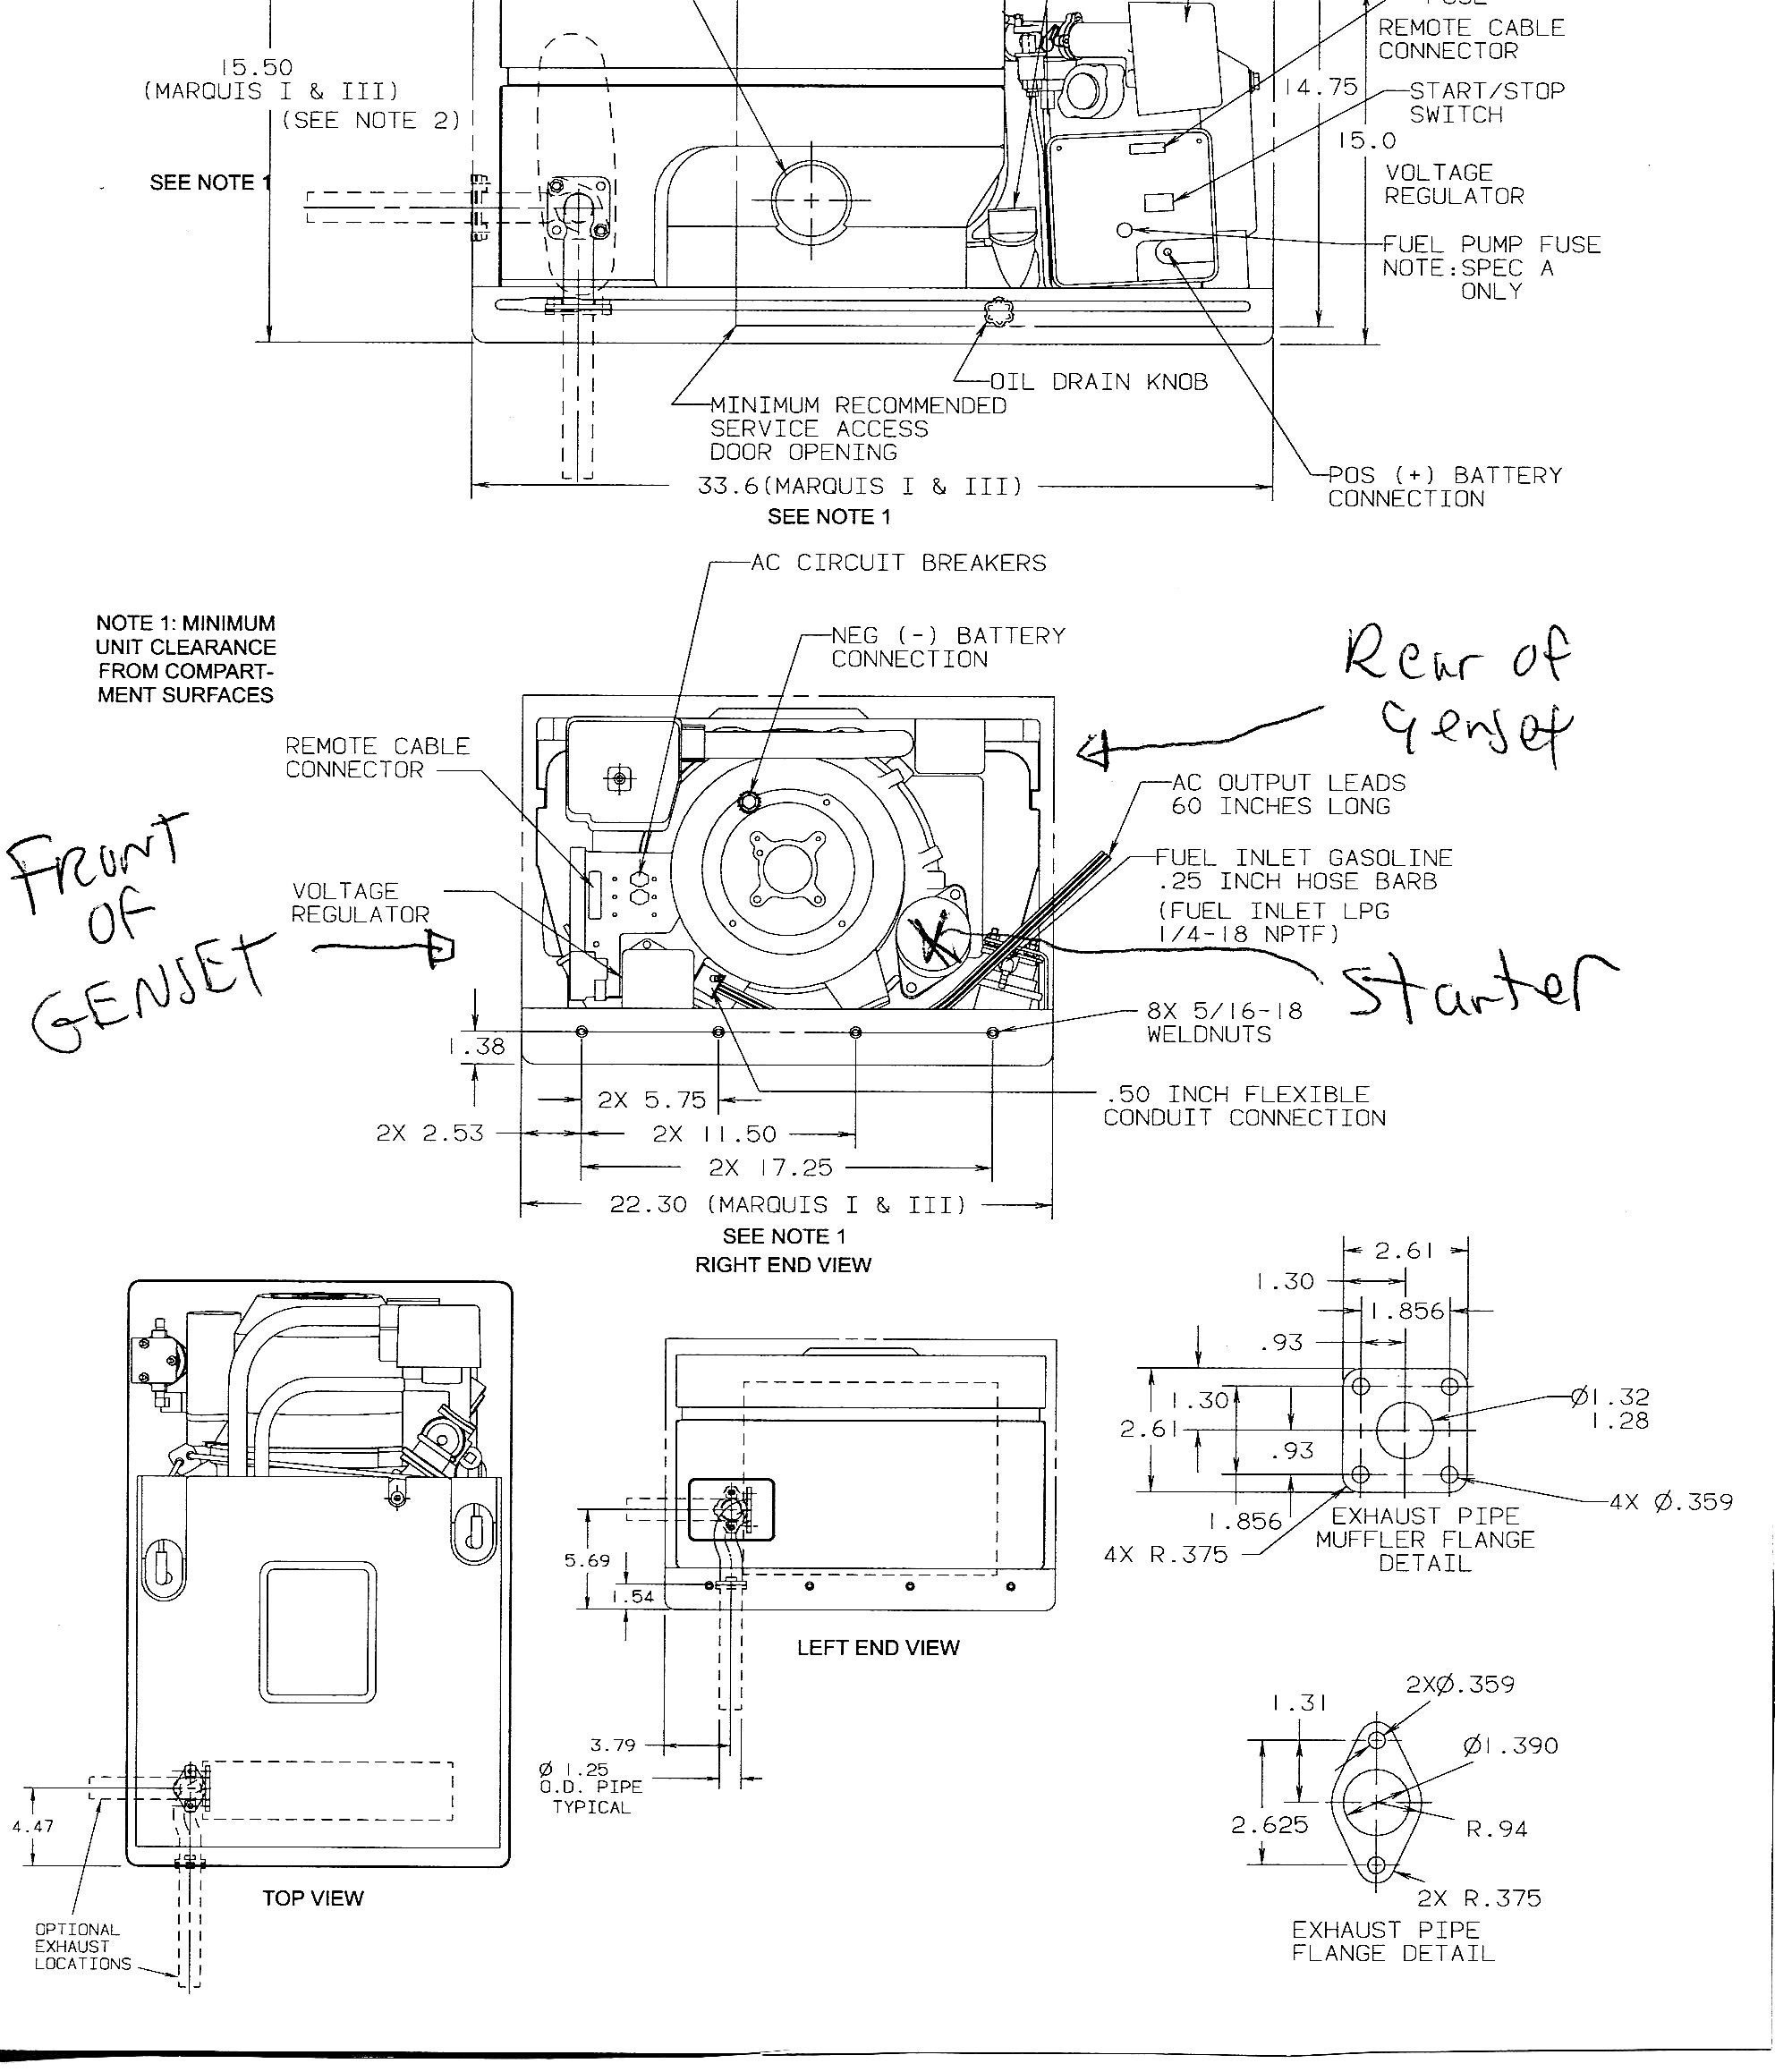 Wiring Diagram an Generator Refrence An 4000 Parts Diagram New Wiring Diagram for An Generator